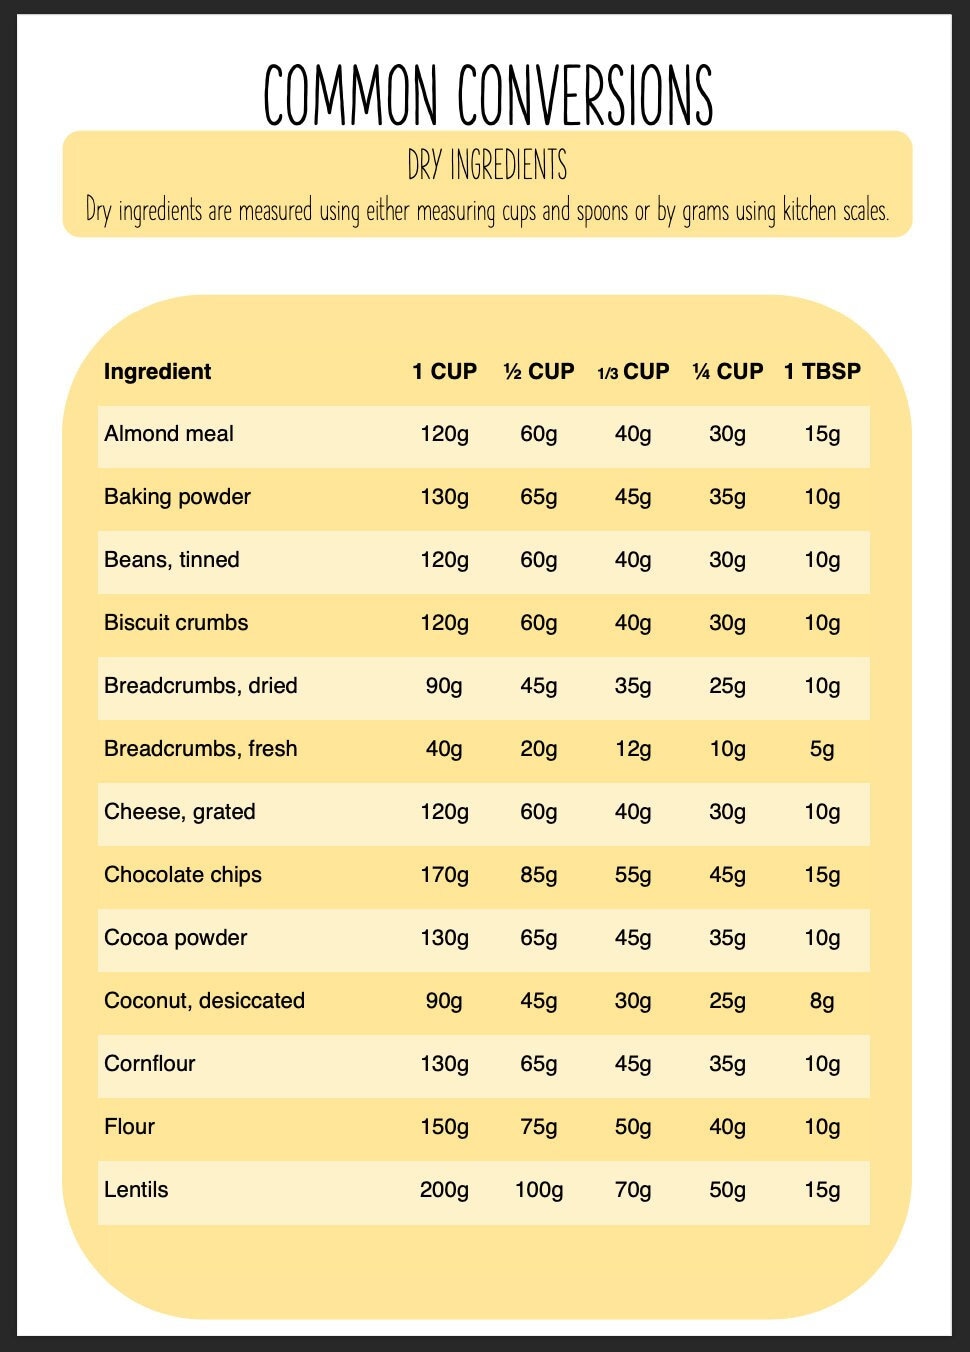 common unit conversions of dry ingredients: grams to cups and tablespoons